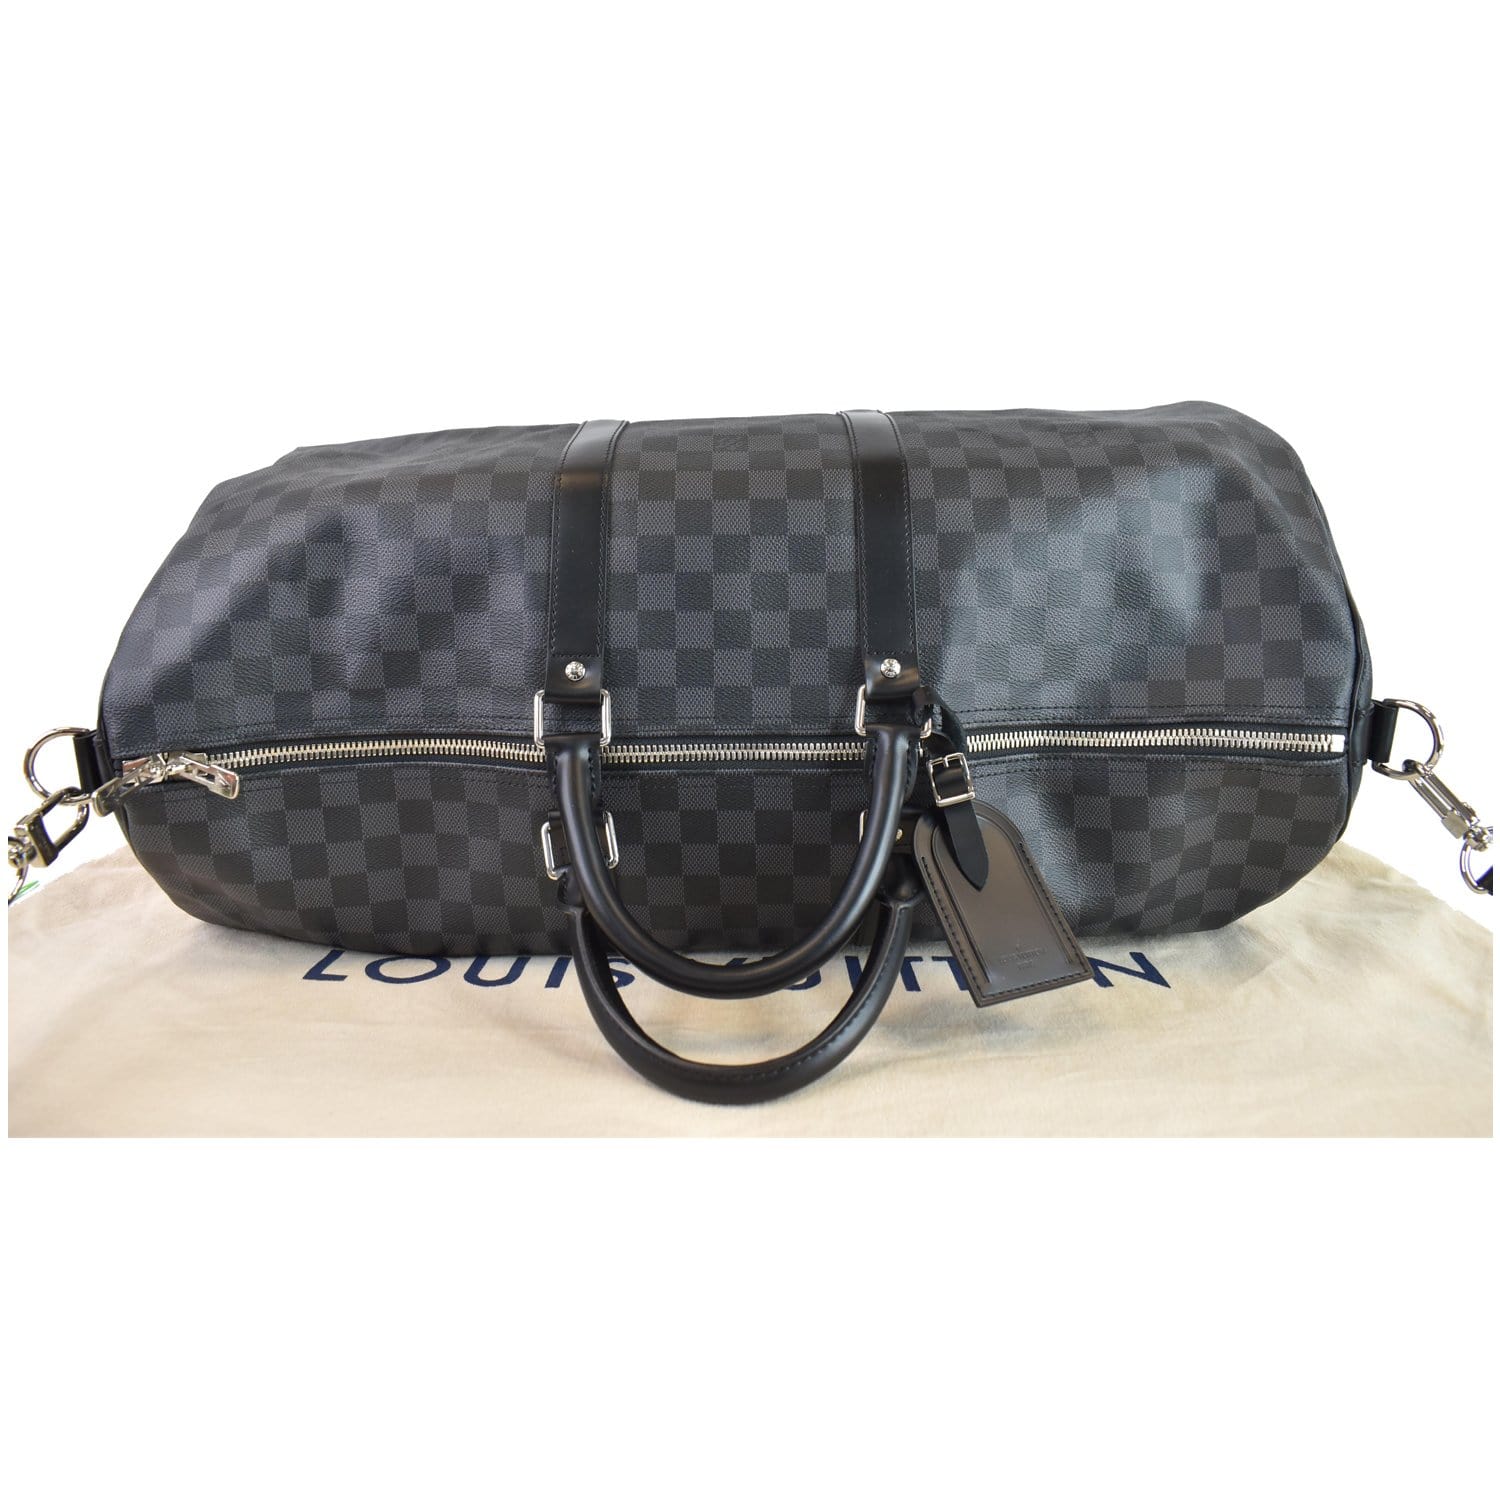 Louis Vuitton Keepall Damier Graphite Bandouliere 55 with Strap 872889  Black Coated Canvas Weekend/Travel Bag, Louis Vuitton